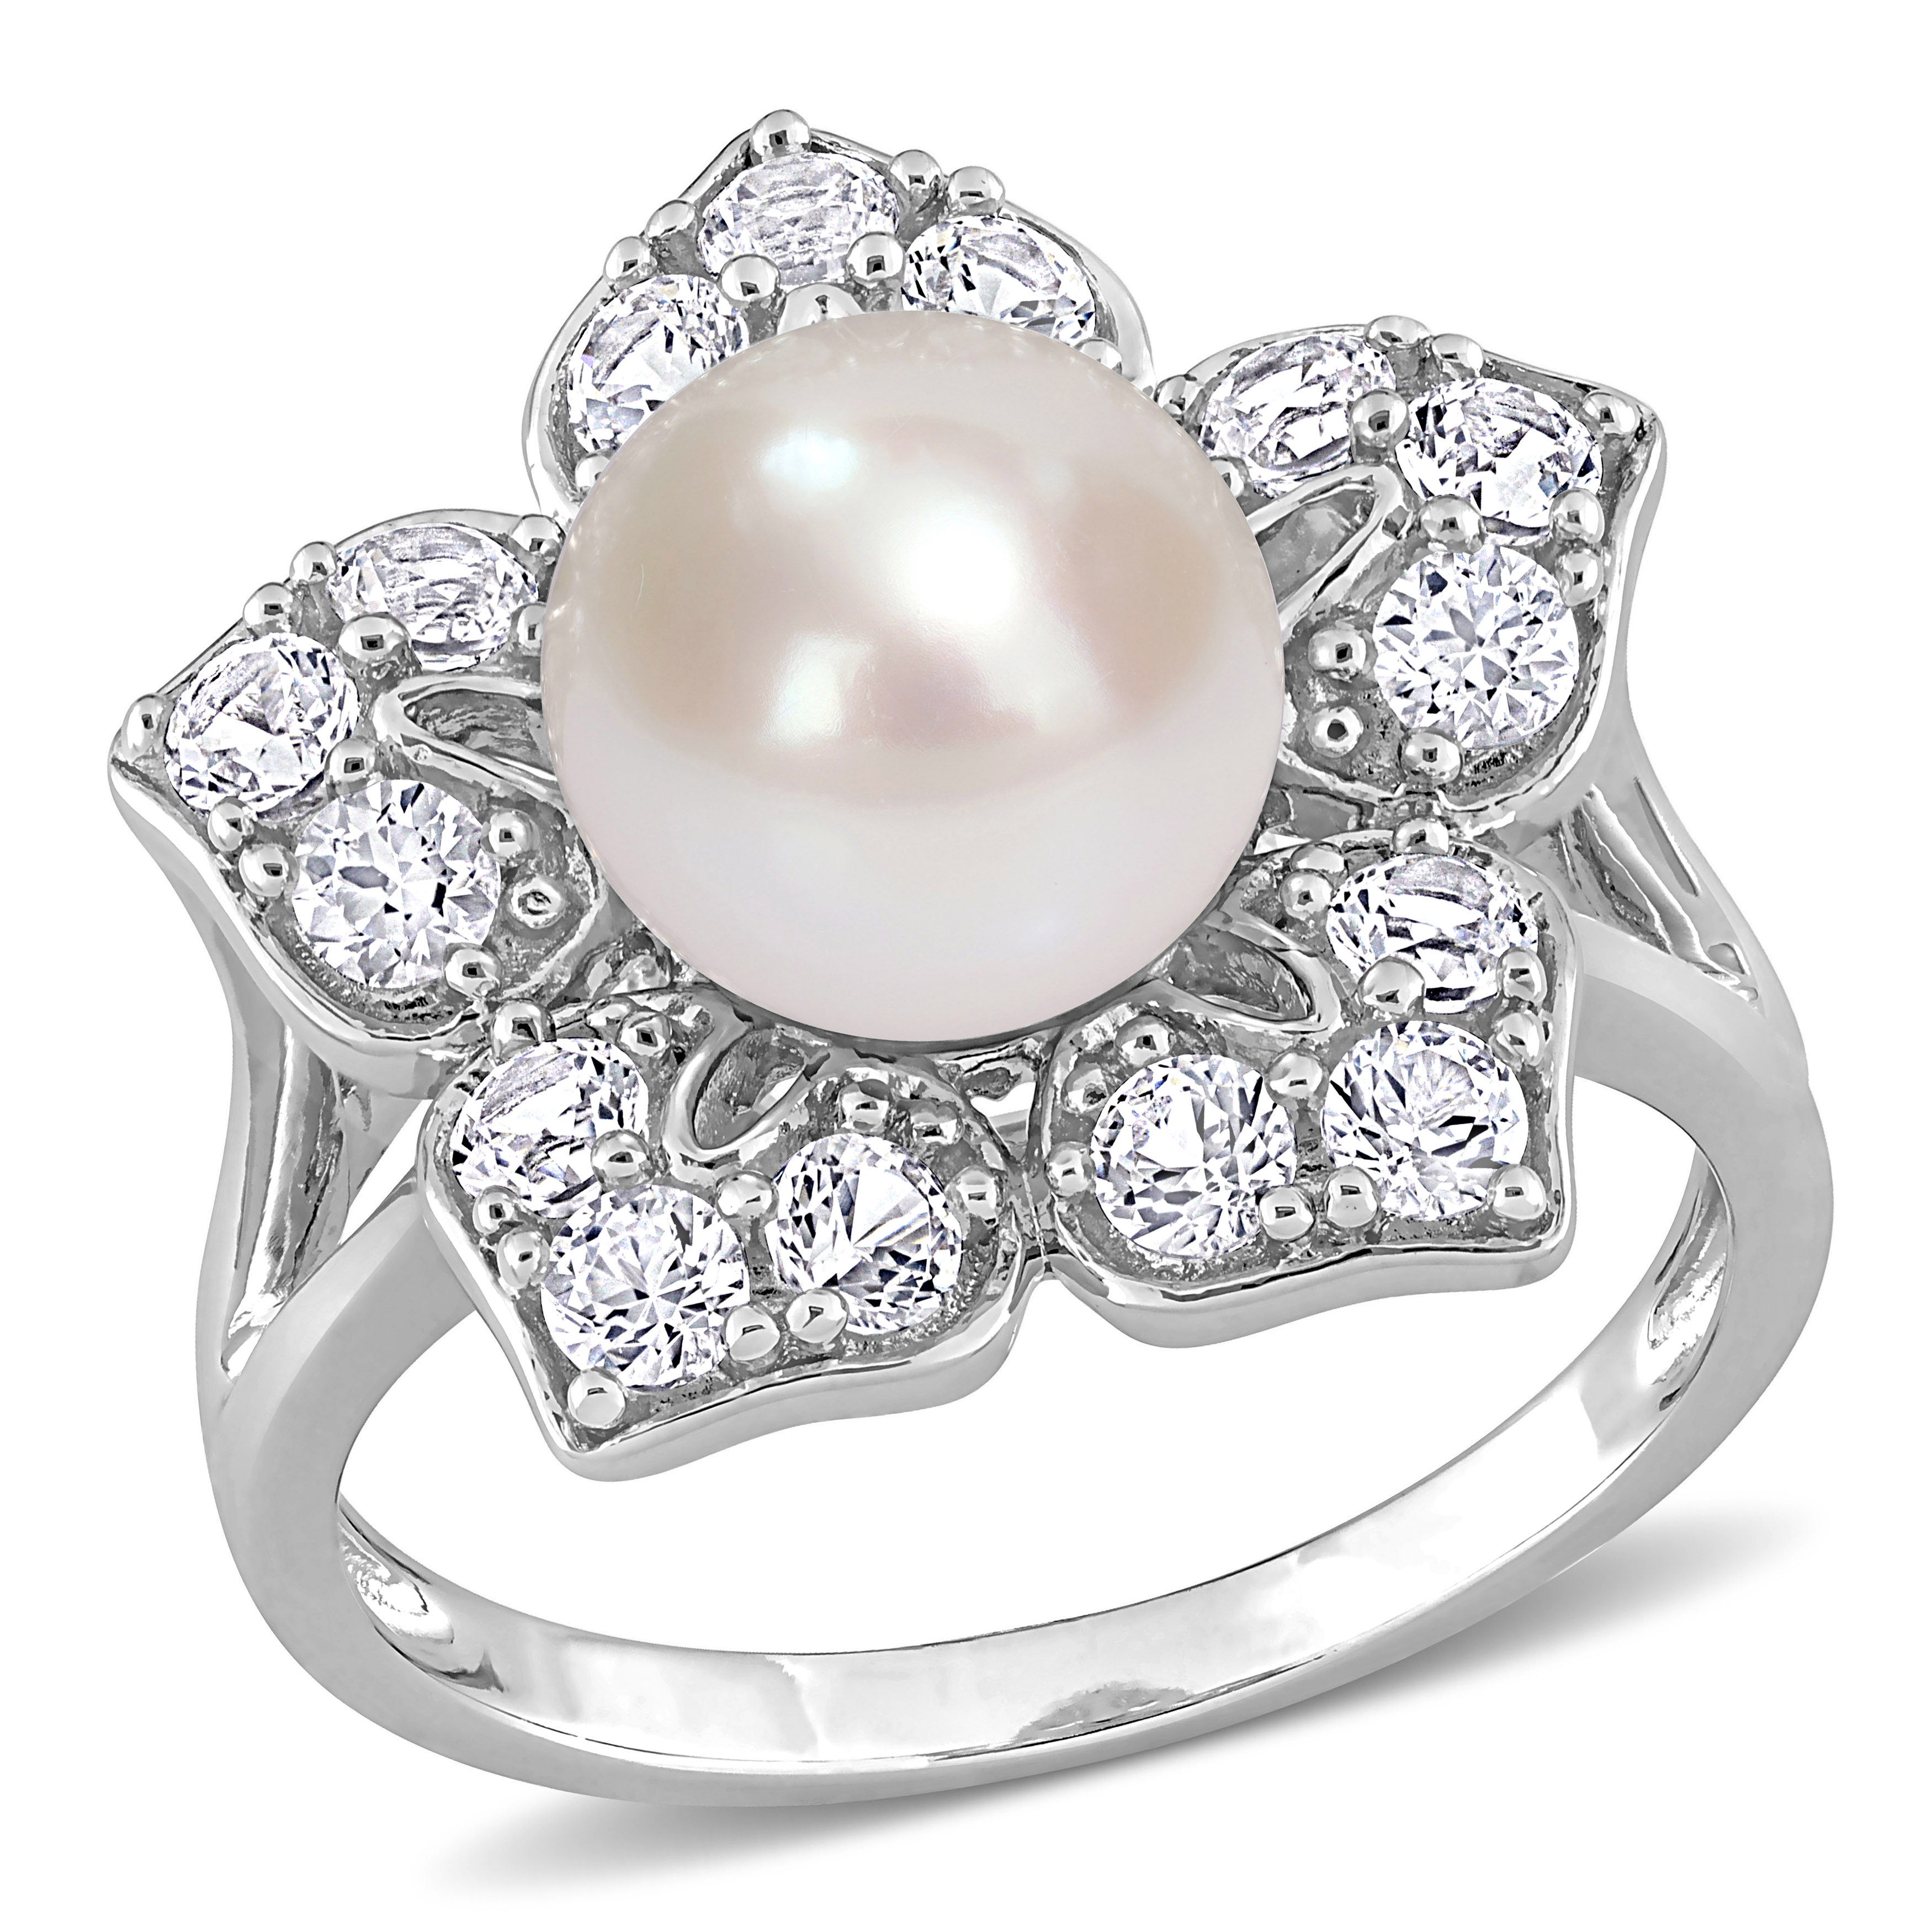 8.5-9 MM Freshwater Cultured Pearl and 1 1/3 CT TGW Created White Sapphire Floral Pearl Ring in Sterling Silver